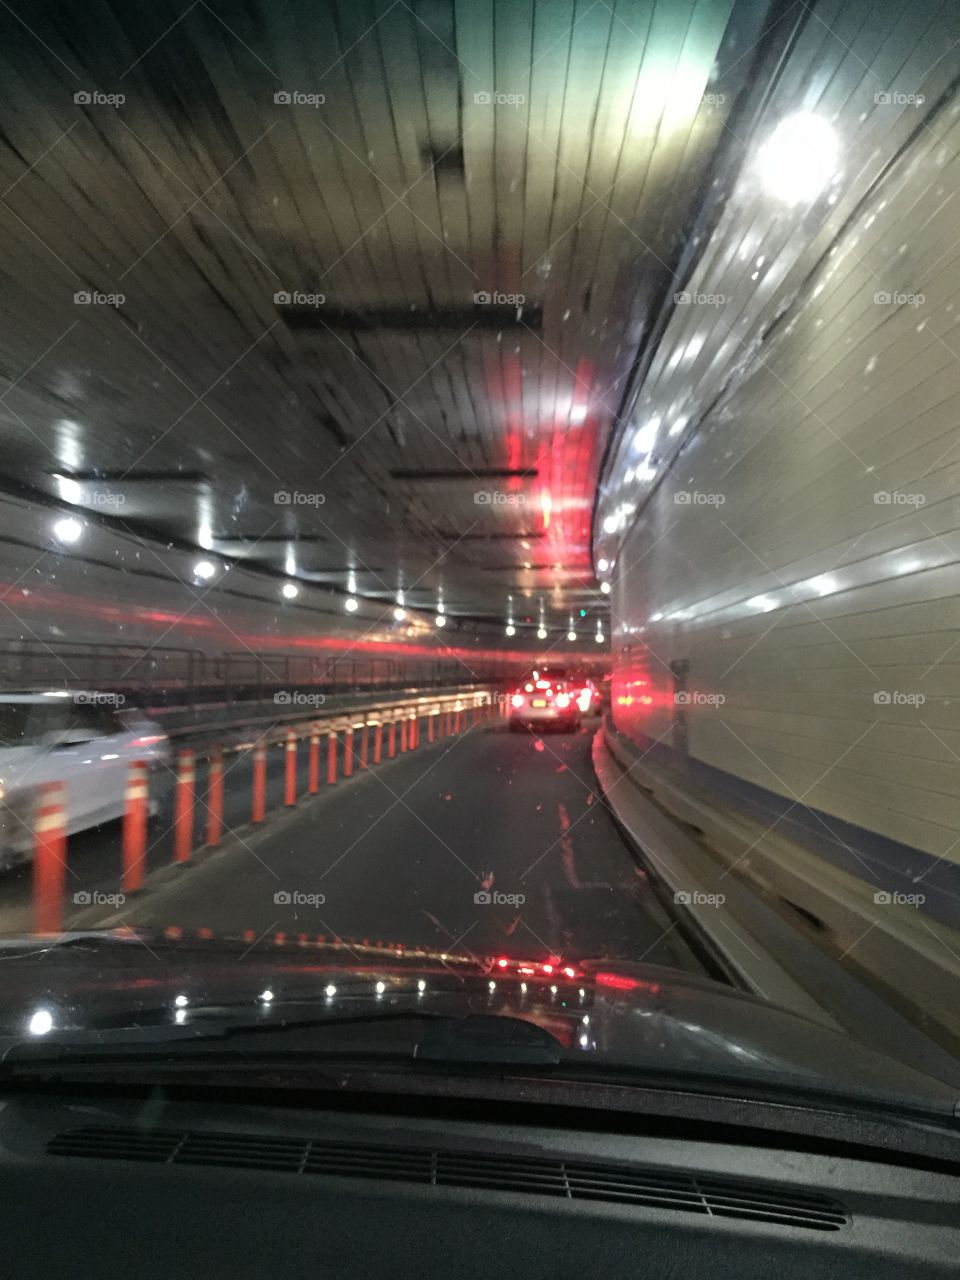 Driving in the Lincoln tunnel.